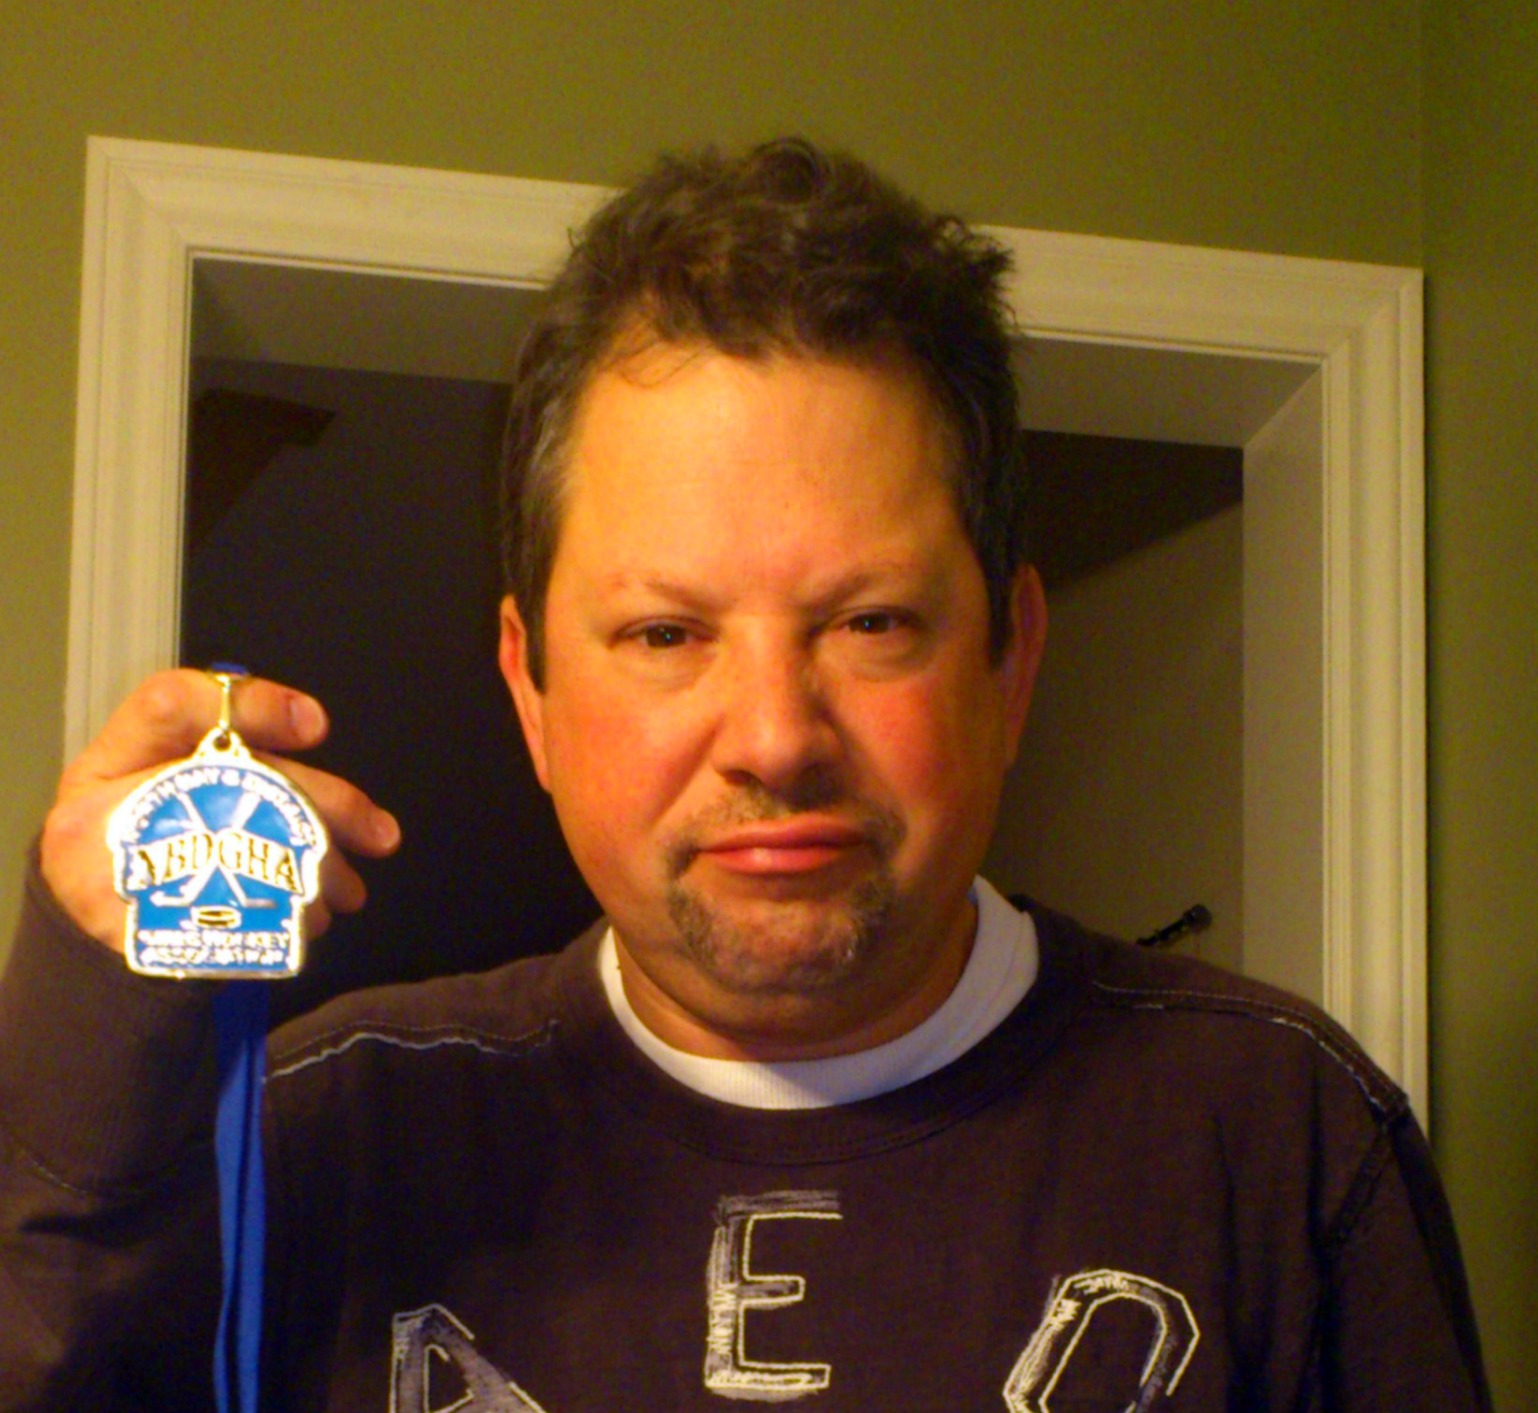 Silver Tournament Medal